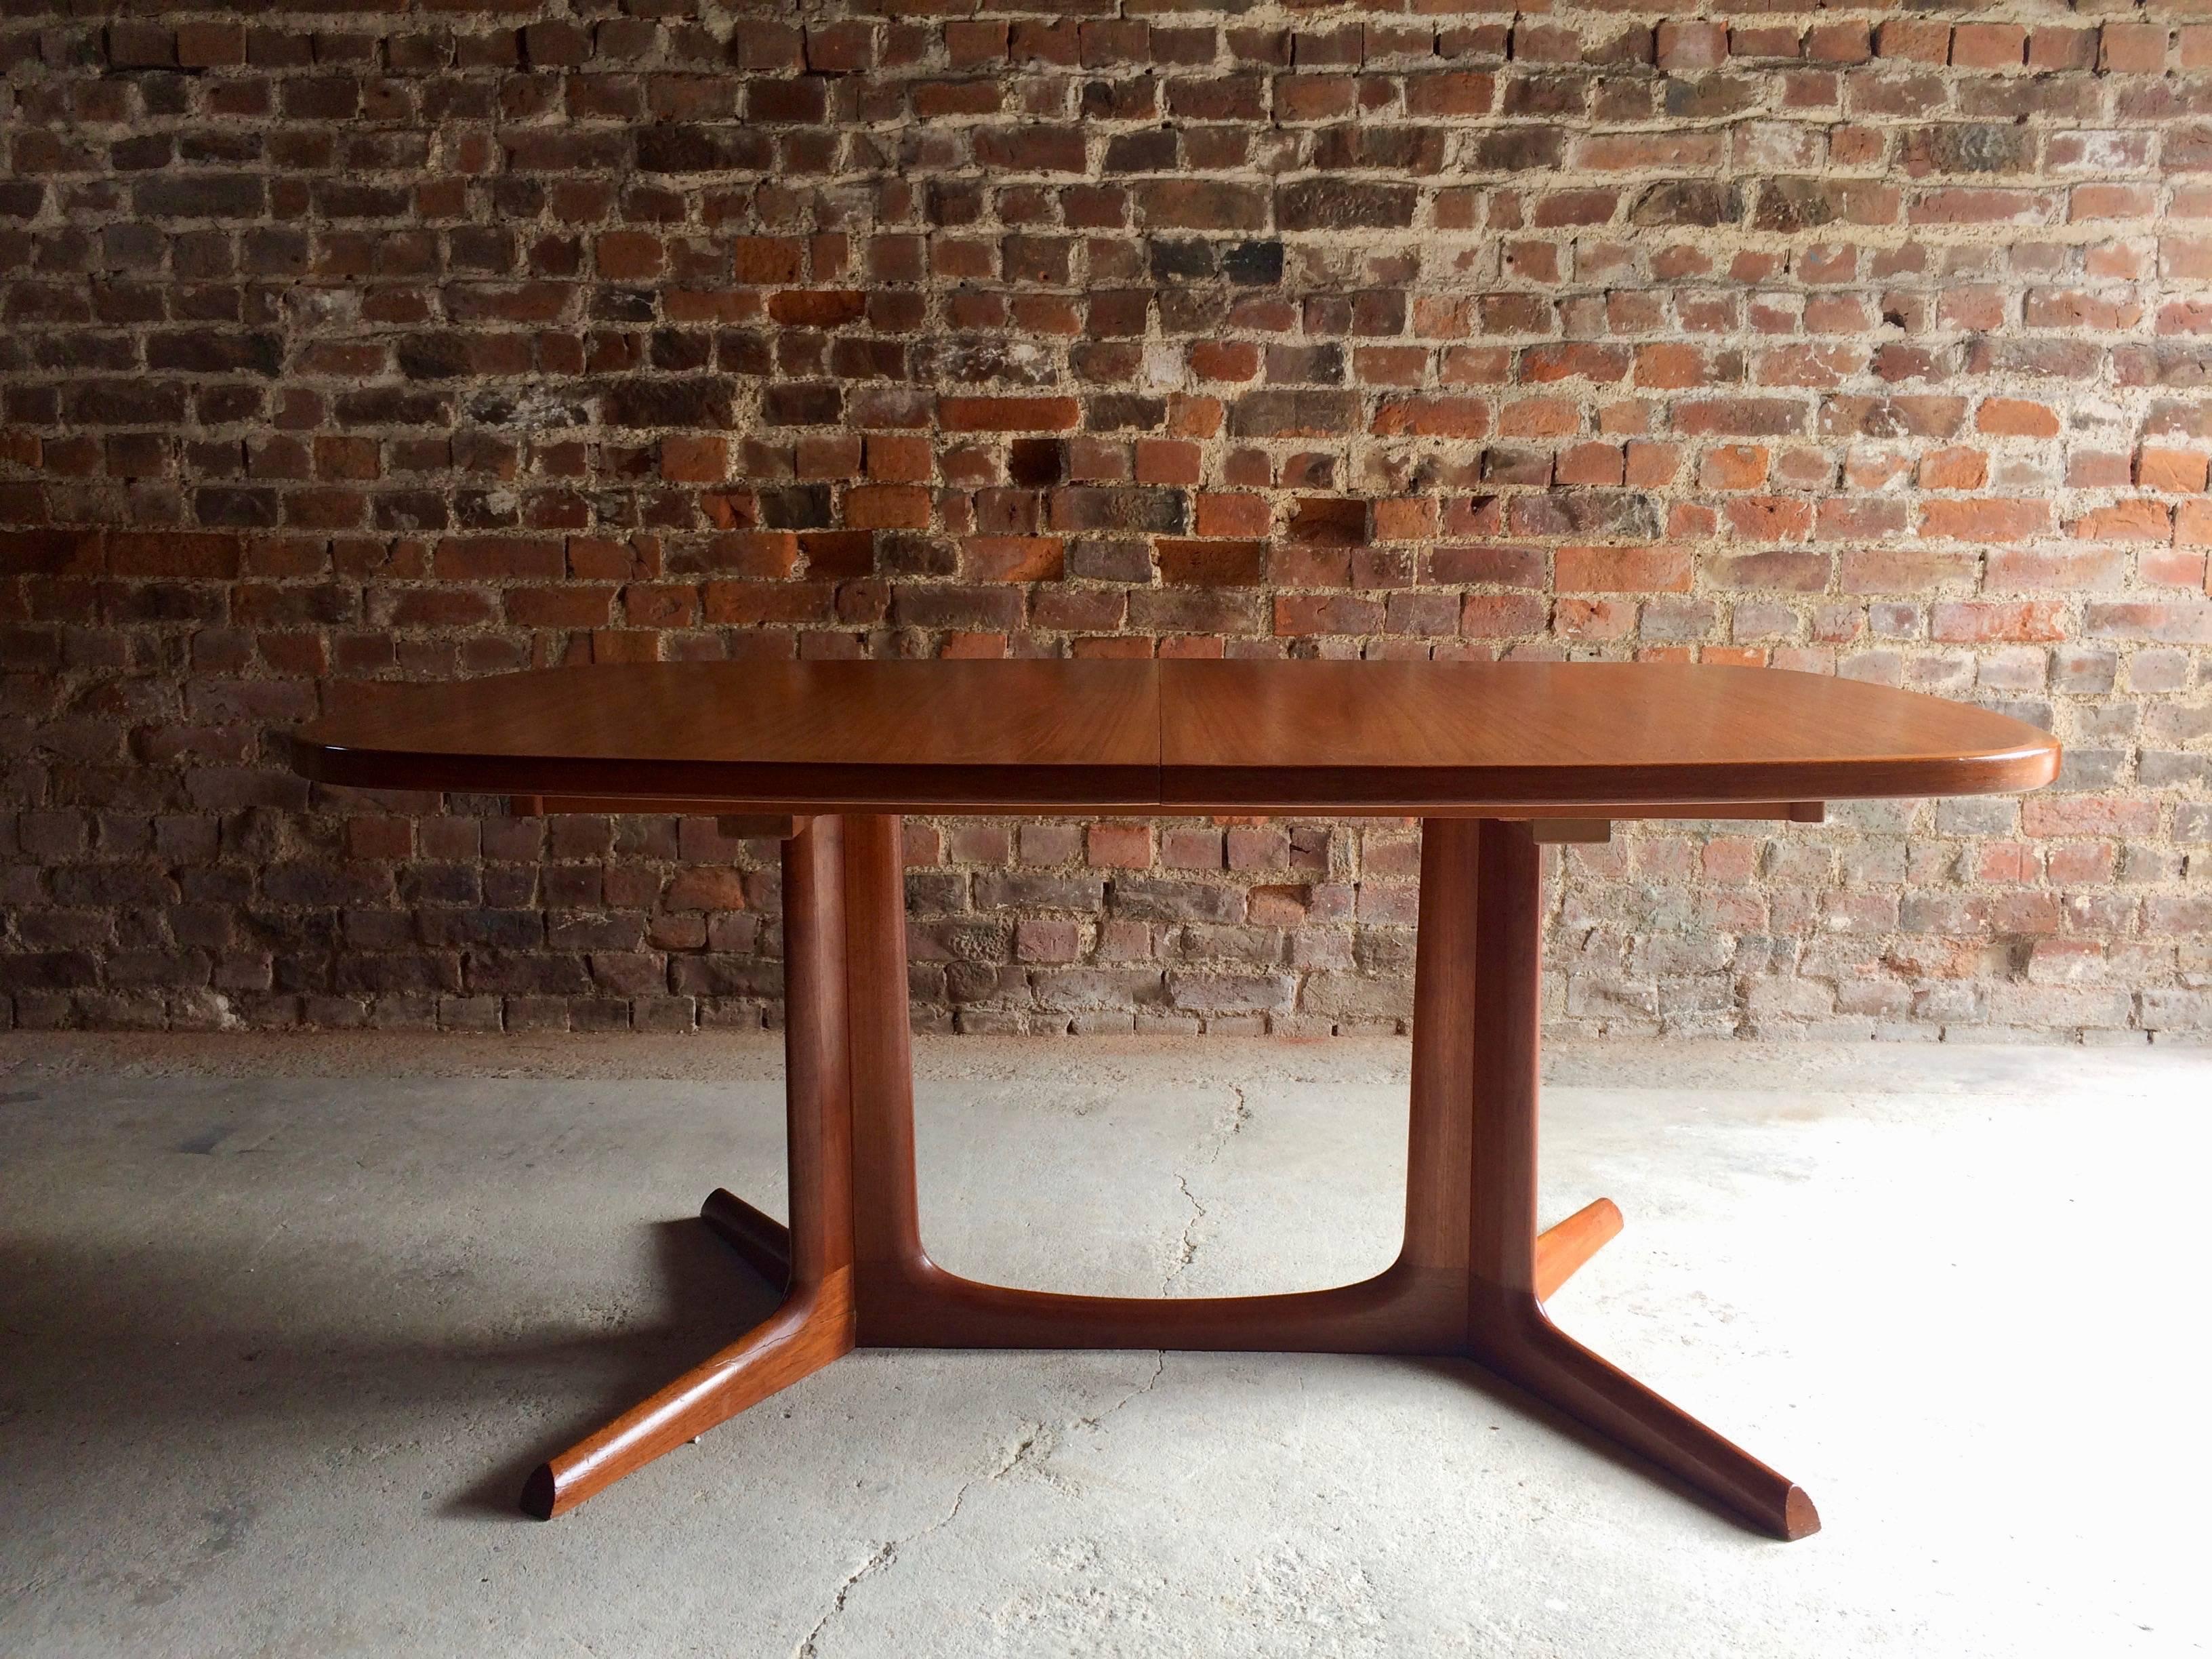 20th Century Niels Kofoed for Koefoeds Hornslet Solid Teak Dining Table and Six Chairs Danish